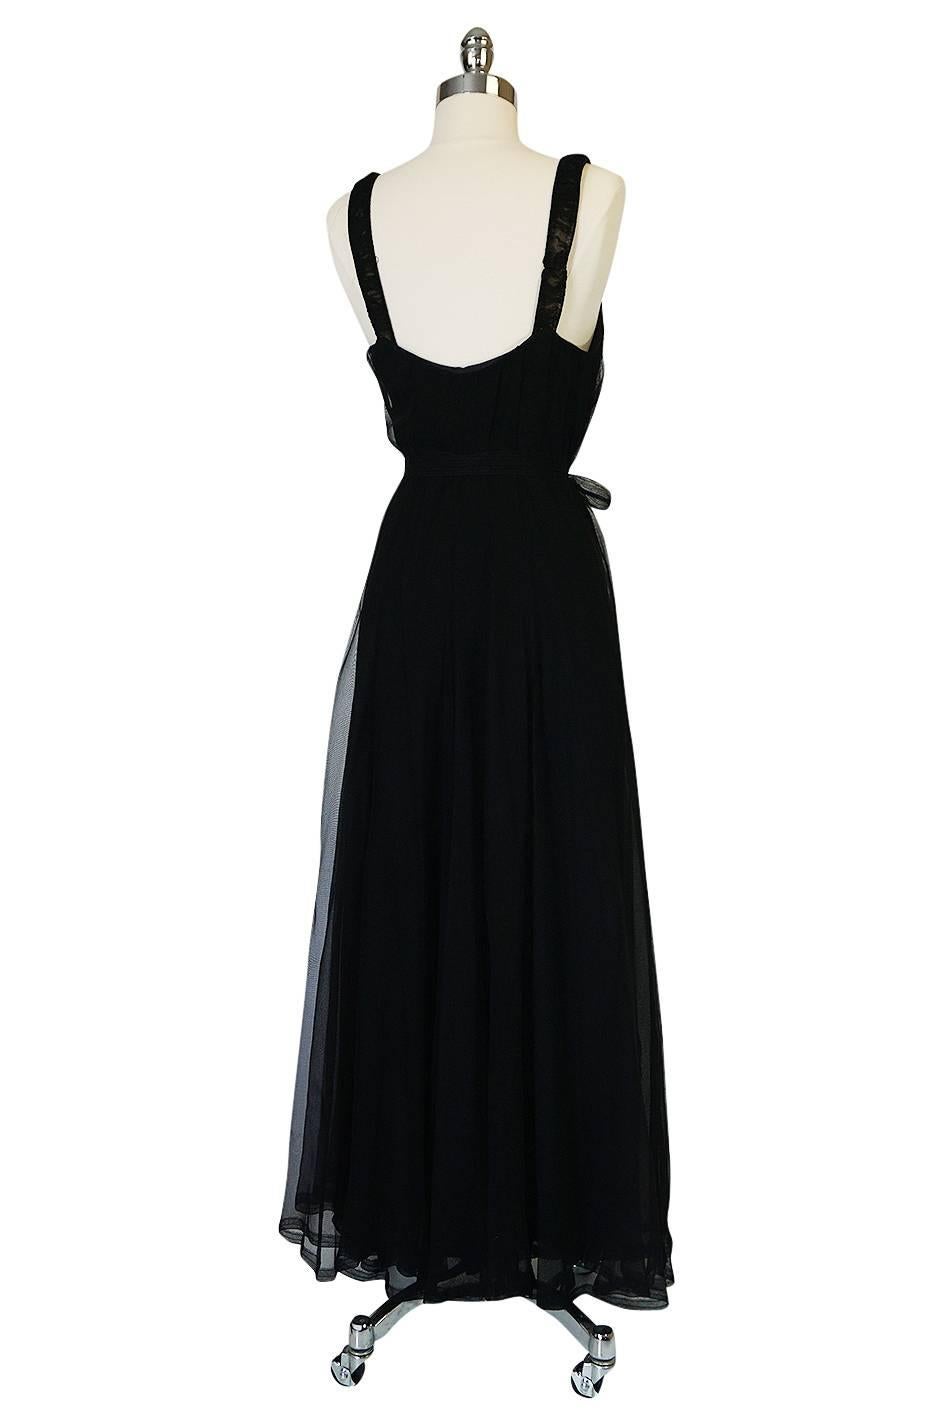 This beautiful and unique piece is wonderful and a personal favorite. It is an incredible late twenties, early thirties gown that is made of a fine black silk chiffon with an inner silk lining and feels heavenly once on. It is entirely cut on the